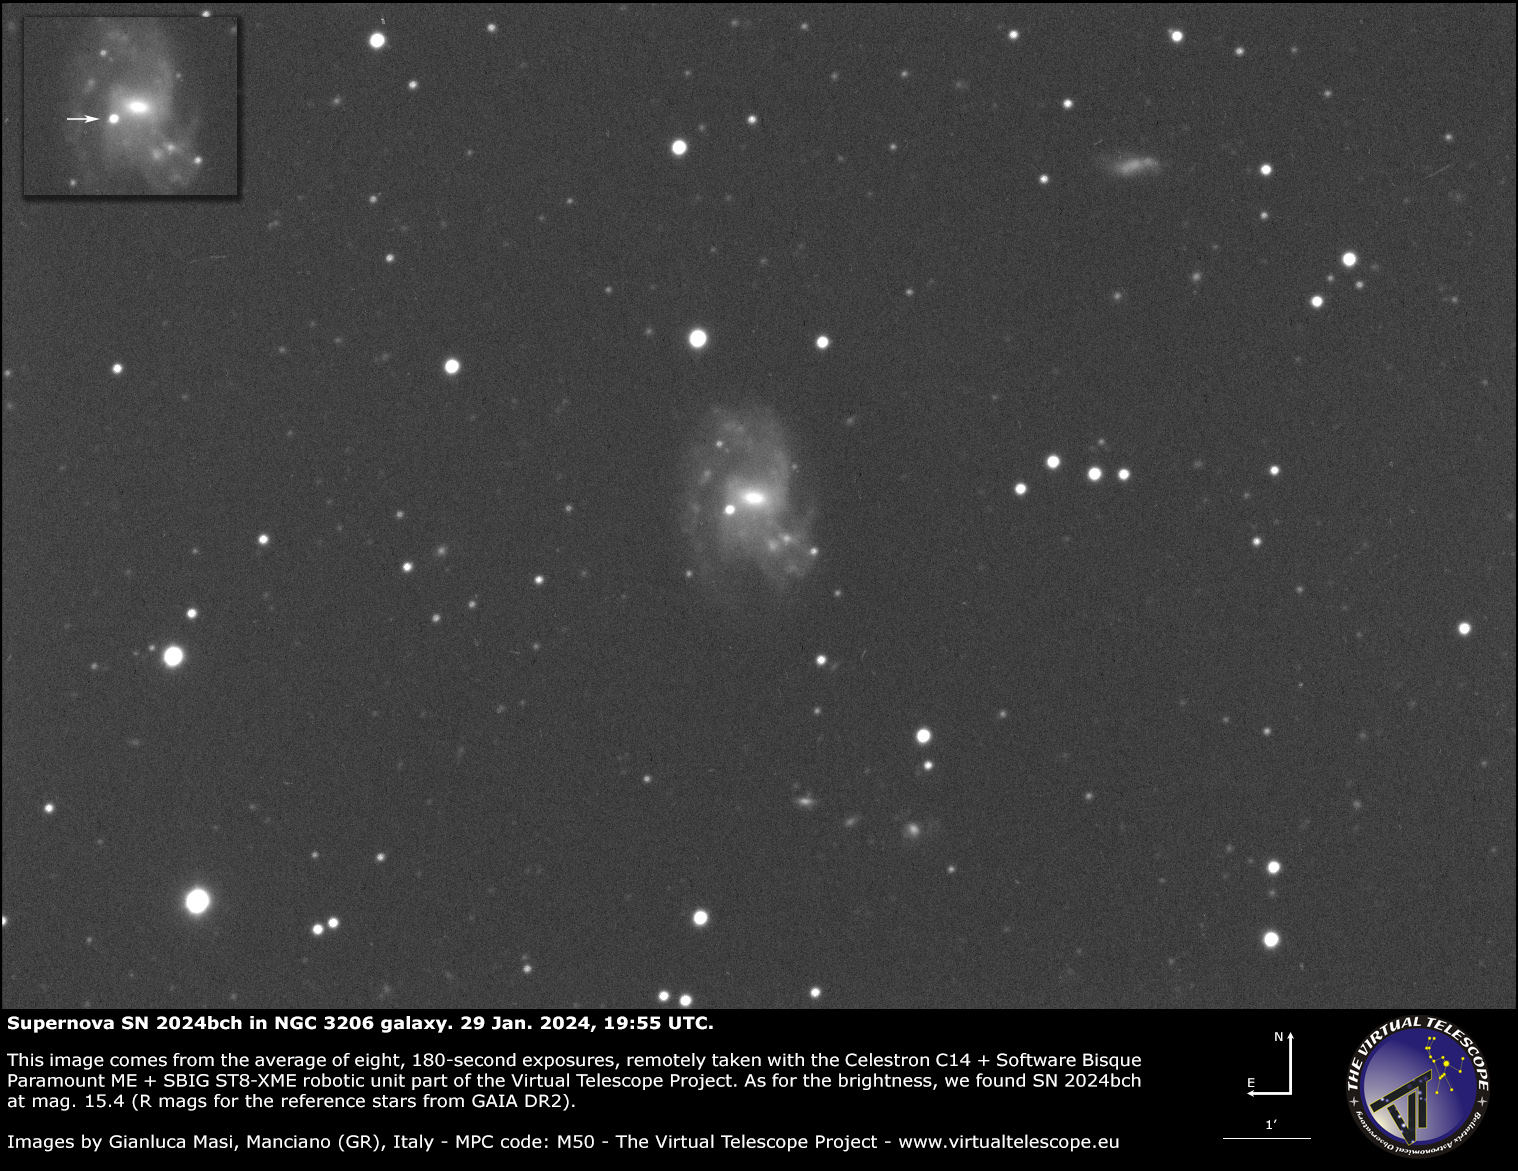 Supernova SN 2024bch in the NGC 3206 galaxy: a image - 29 Jan. 2024.